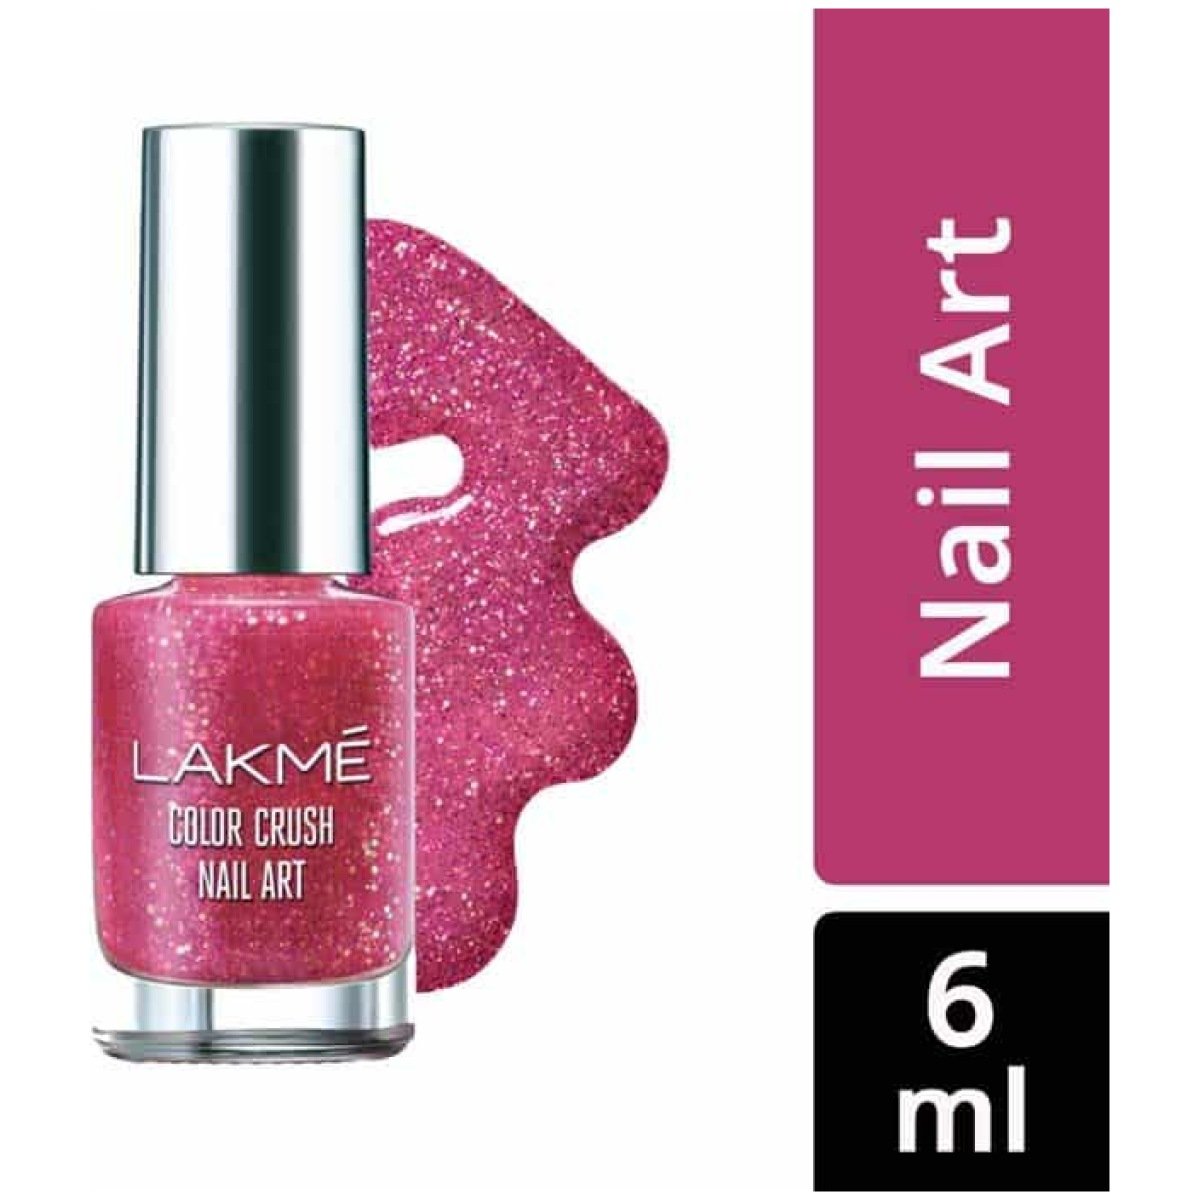 Lakme Absolute Nail Polishes Live Swatches And Review!!! 💅💅💅 - YouTube